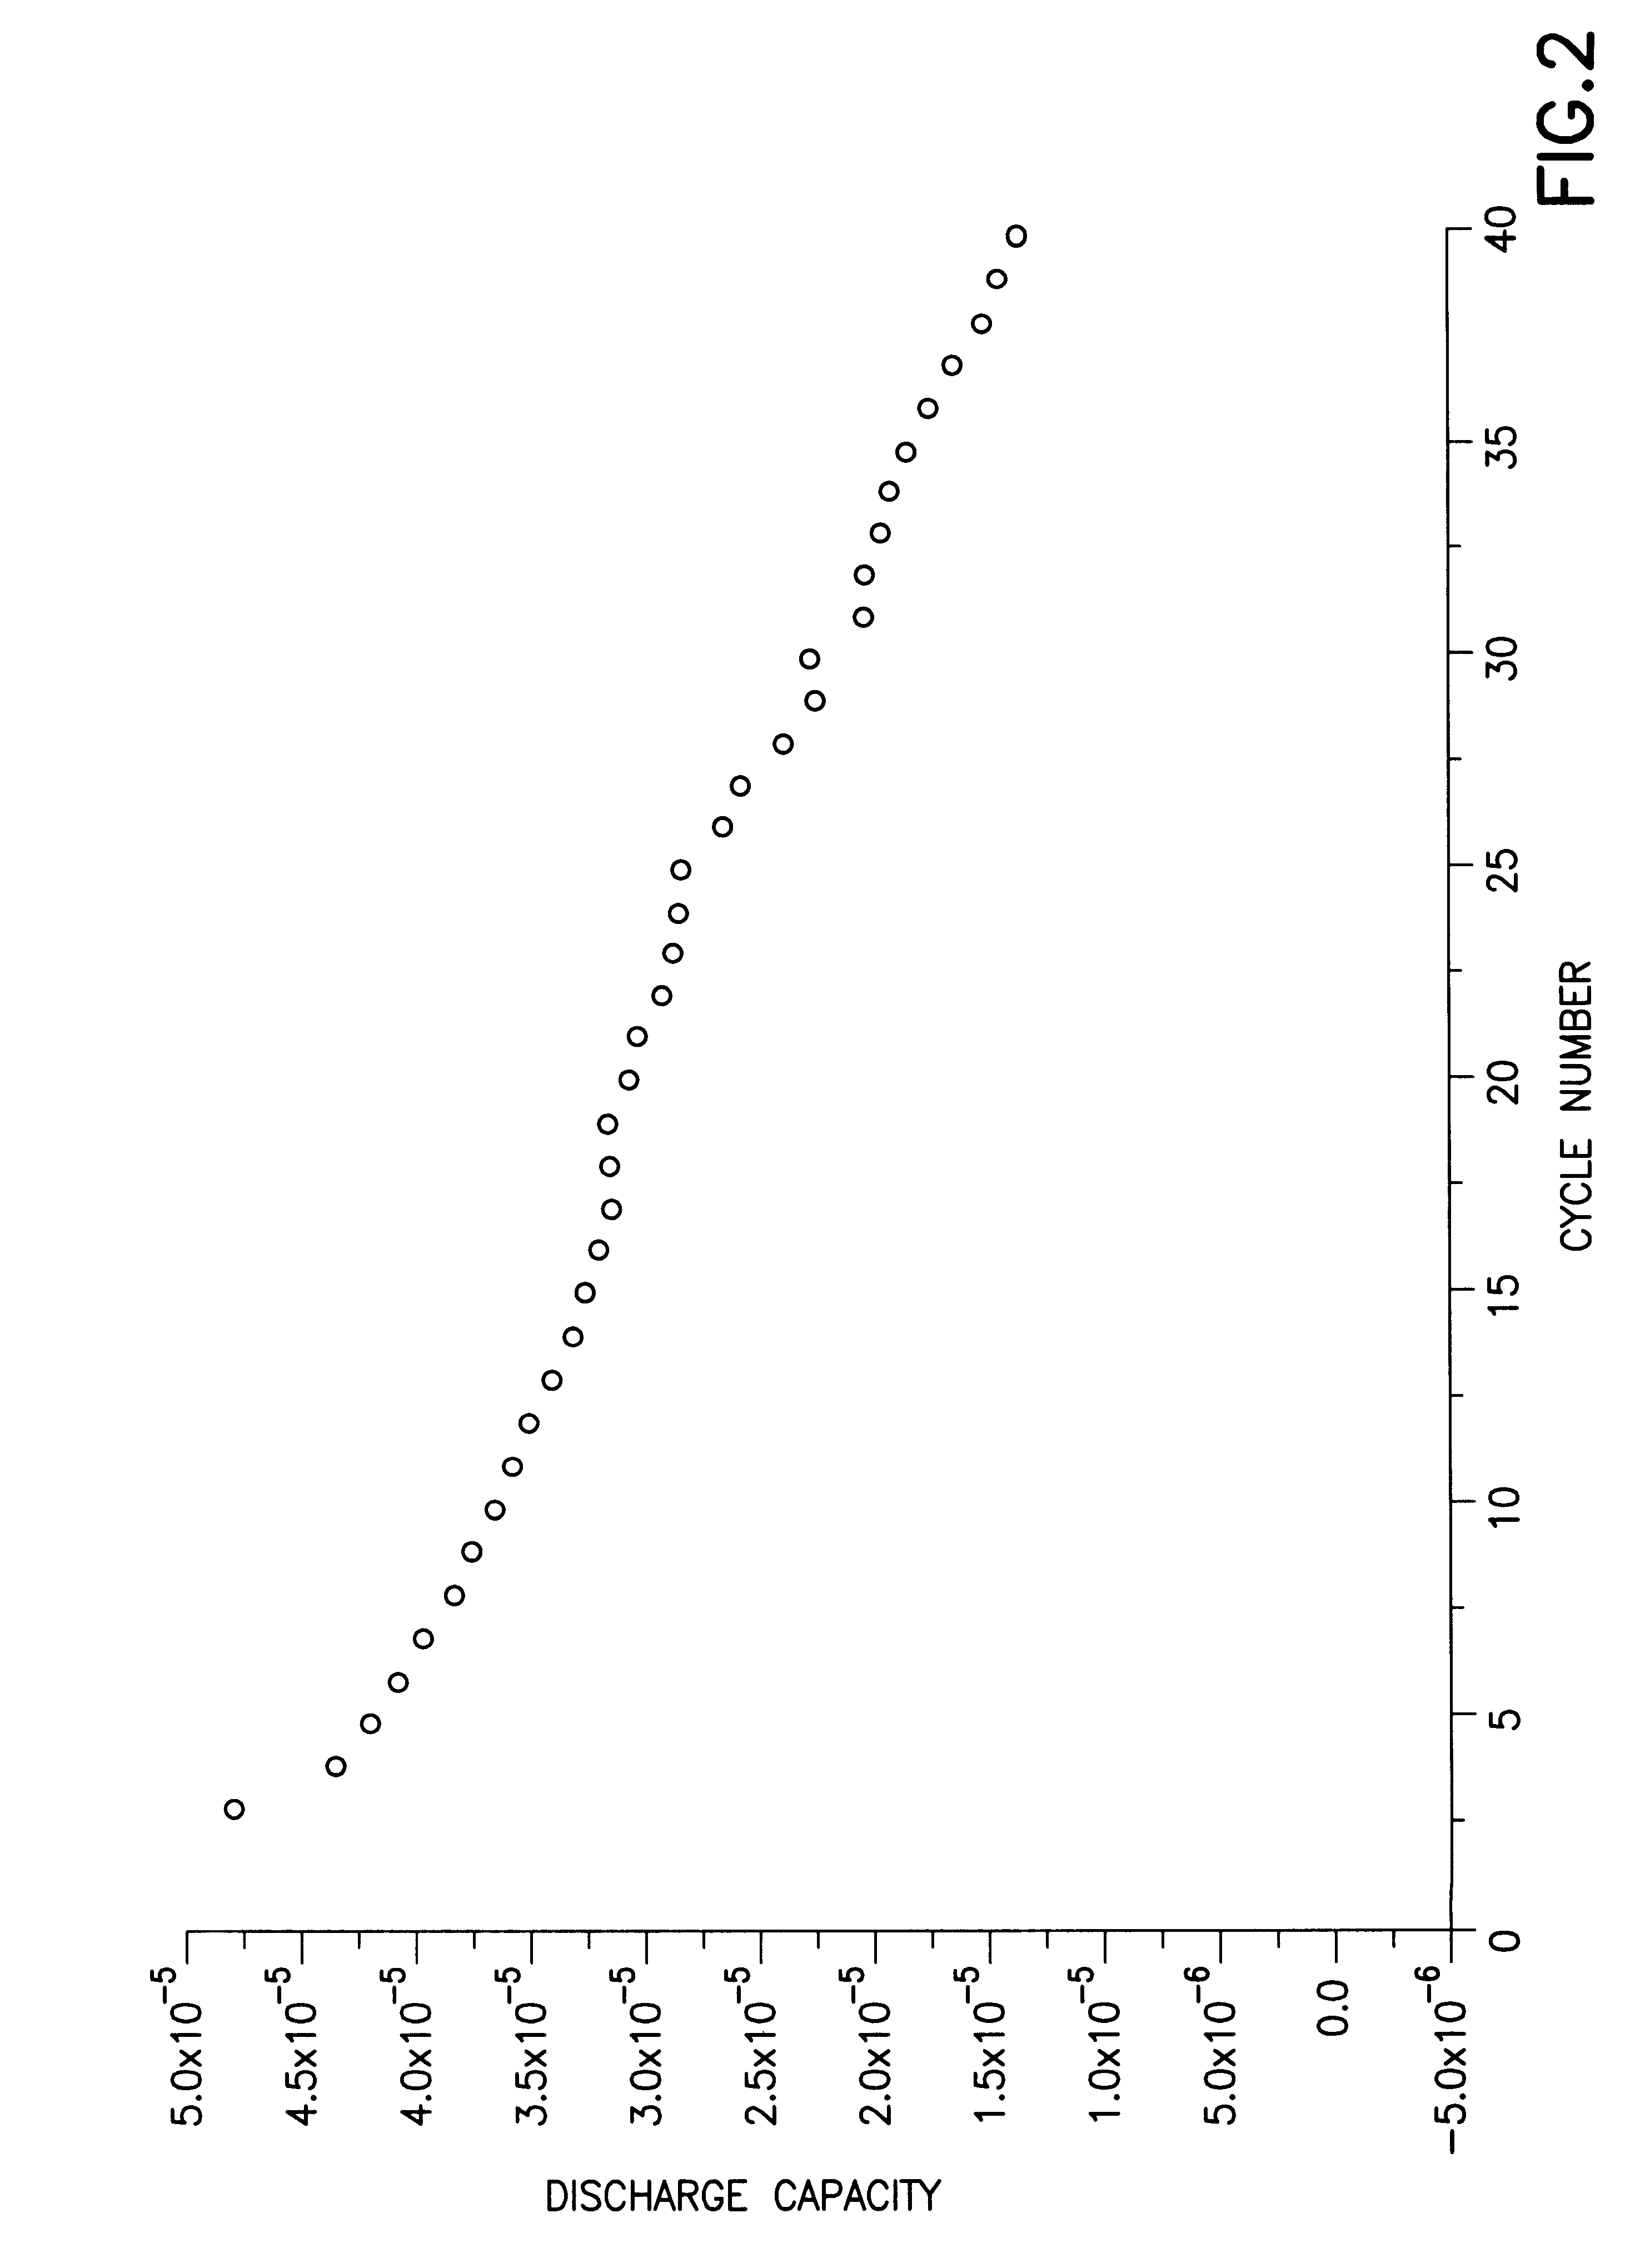 Solid electrolyte for an electrochemical cell composed of an inorganic metal oxide network encapsulating a liquid electrolyte